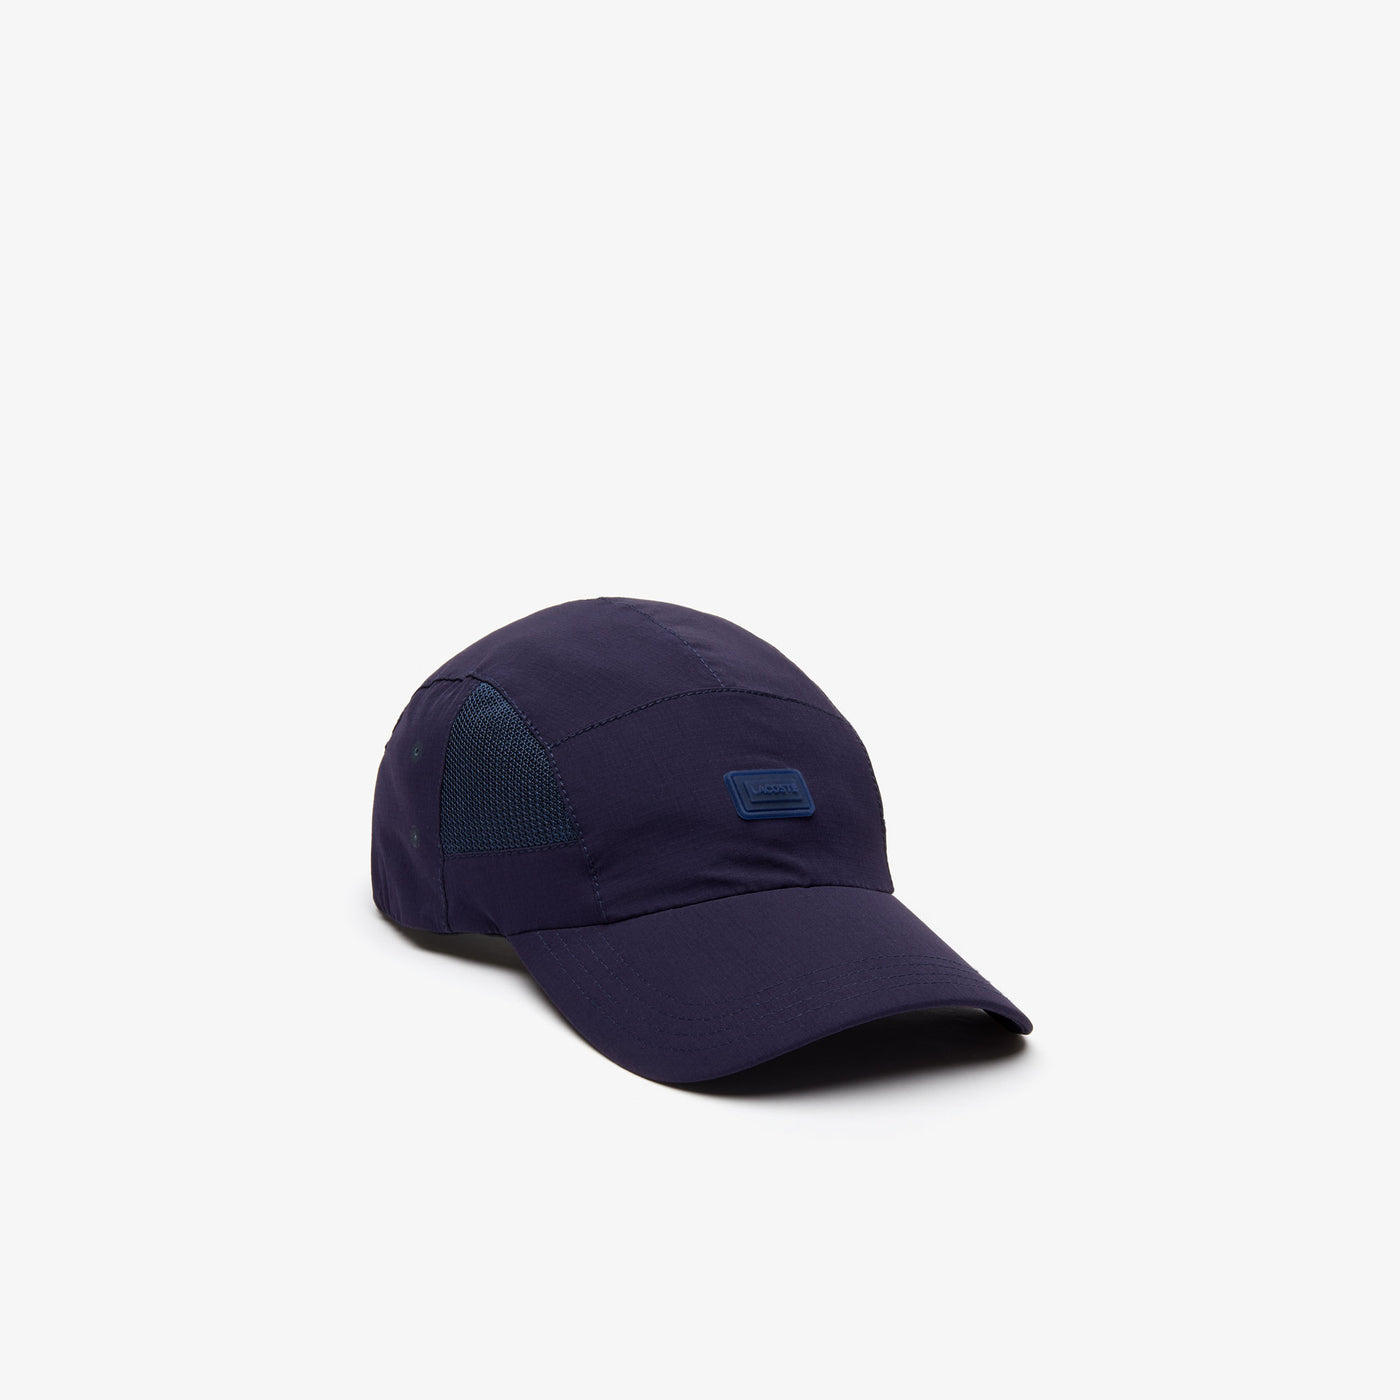 Shop The Latest Collection Of Outlet - Lacoste Men'S Lacoste Motion Cap - Rk4849 In Lebanon